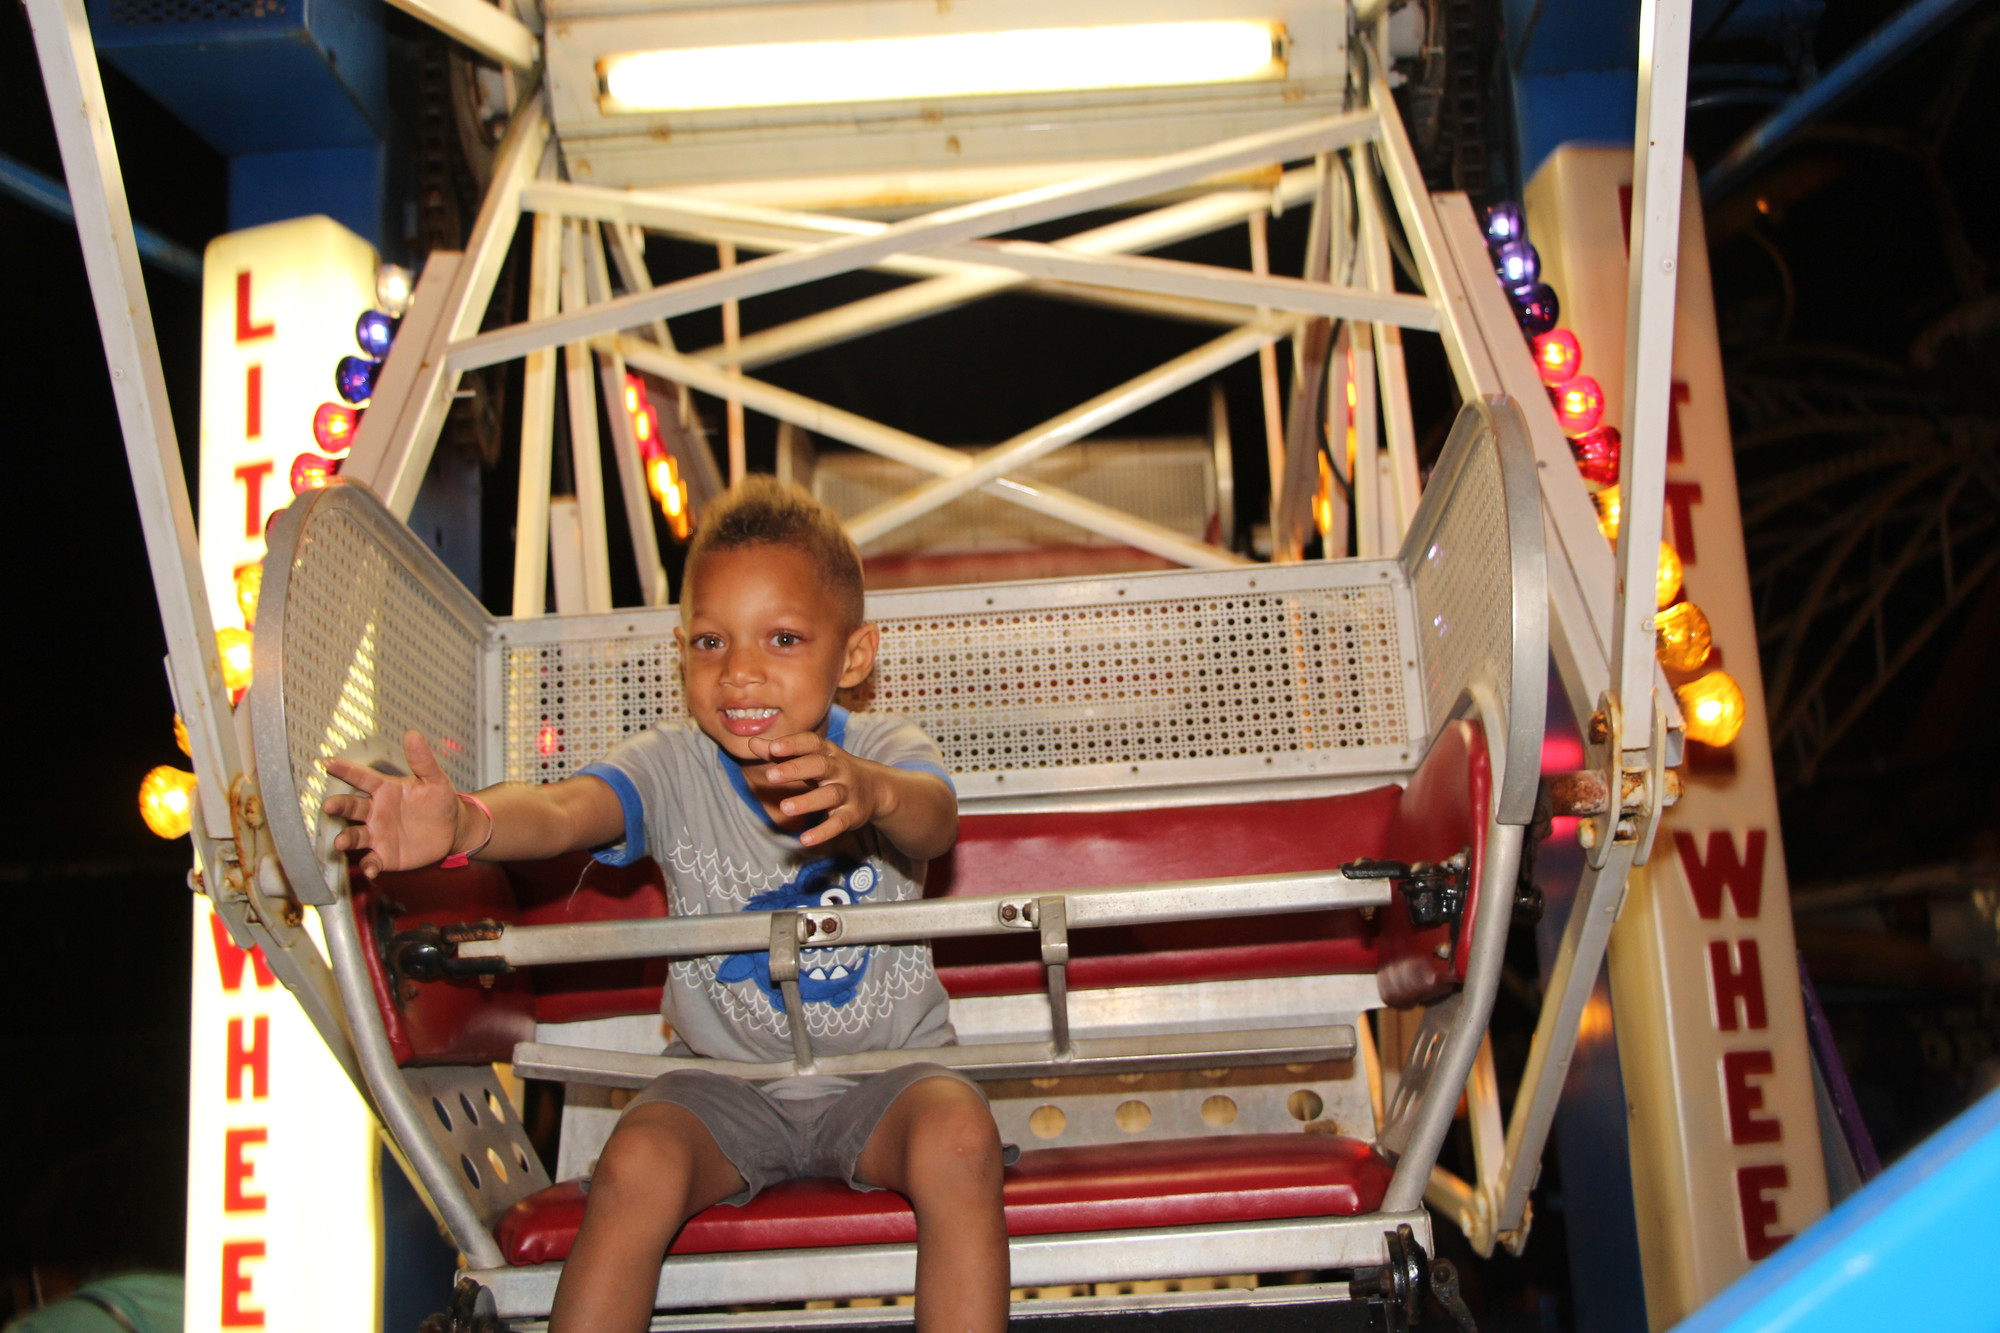 Jayden Smith, 3, had a great time on the little circus wheel.